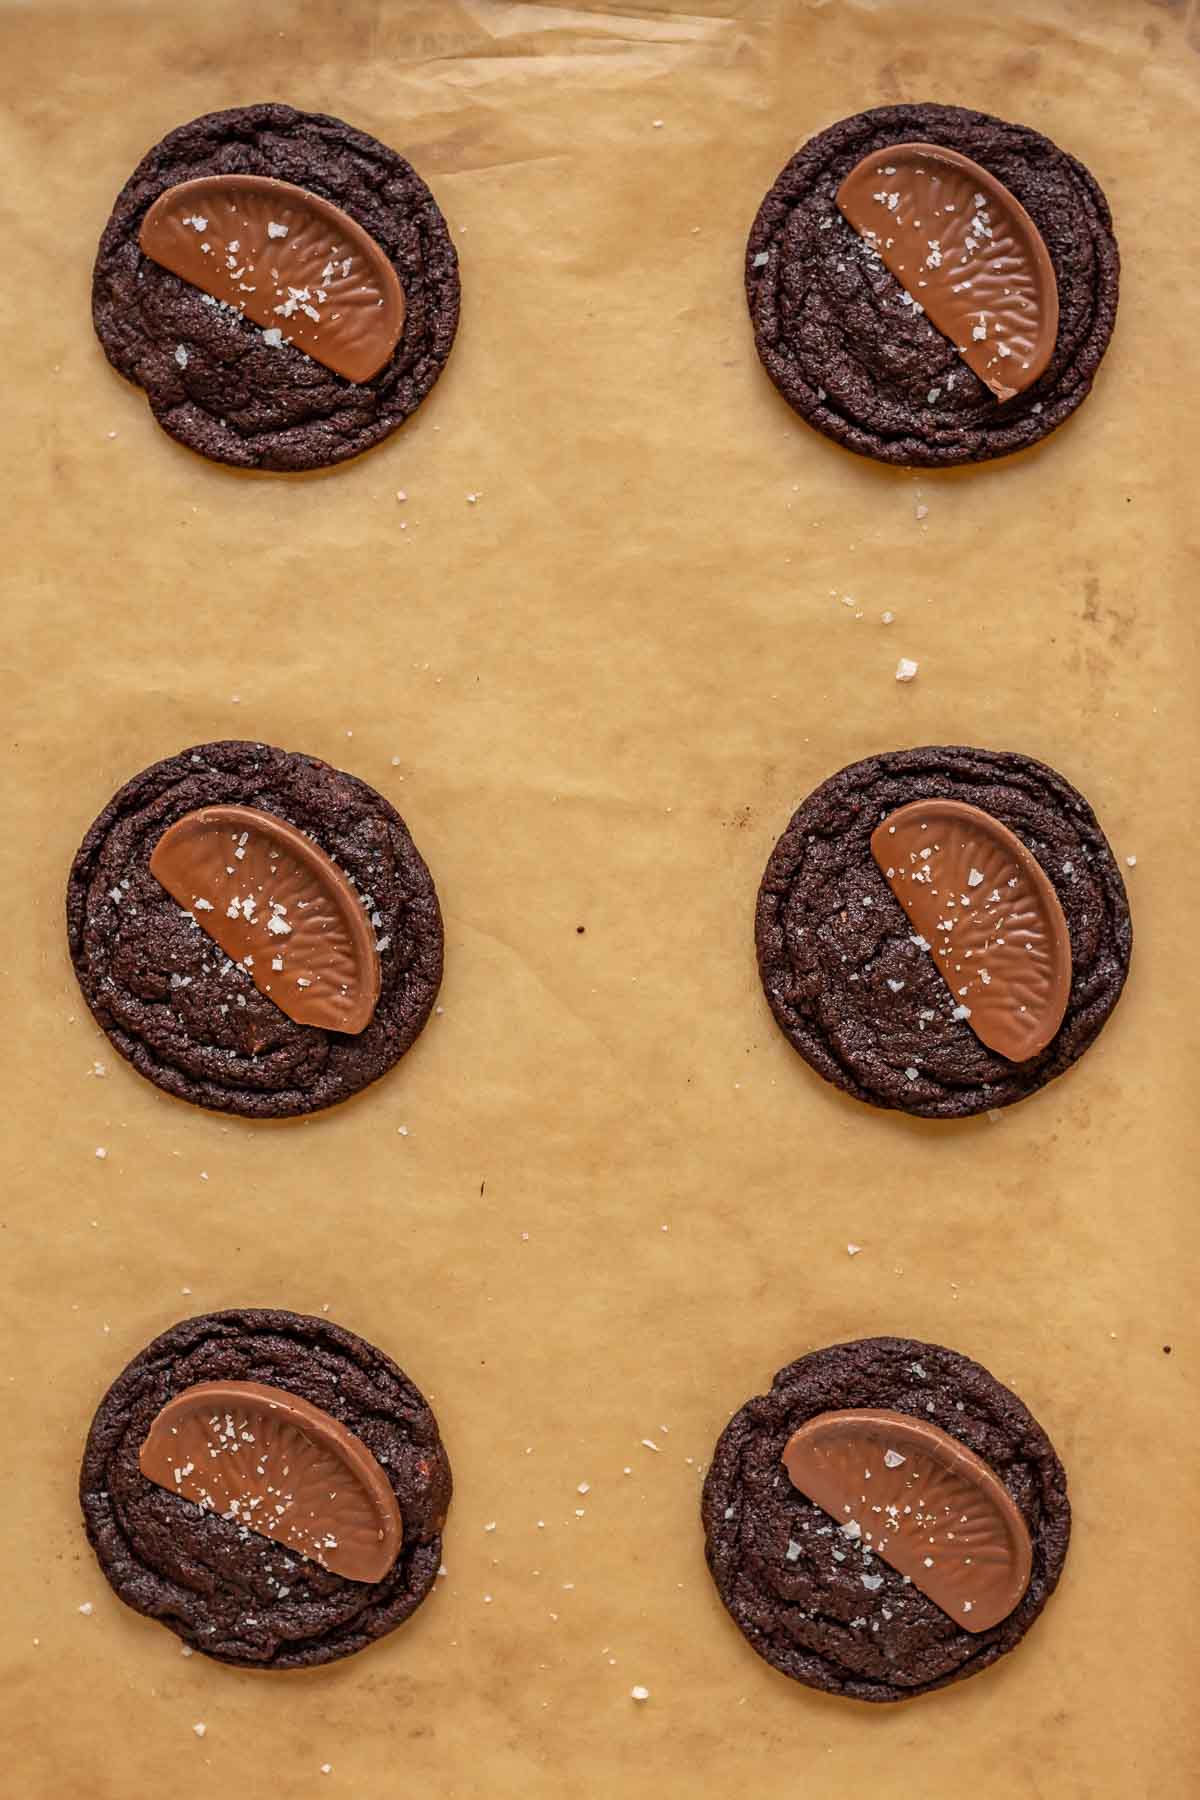 Baked chocolate cookies with slices of chocolate orange on top of each.